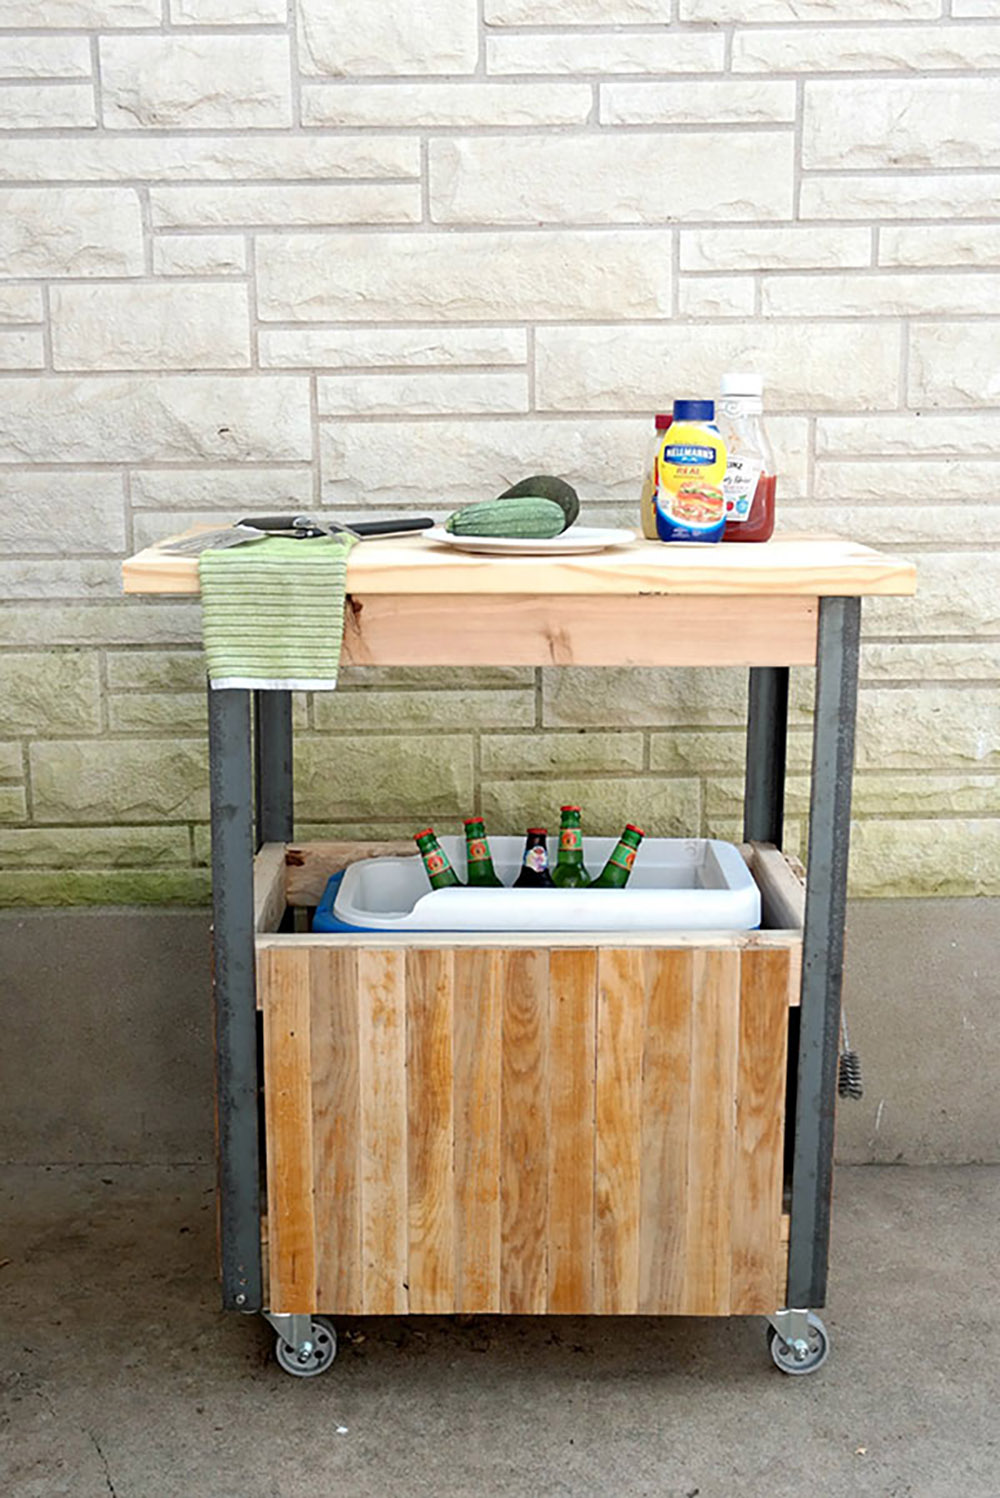 A grill cart made from old wood floors.